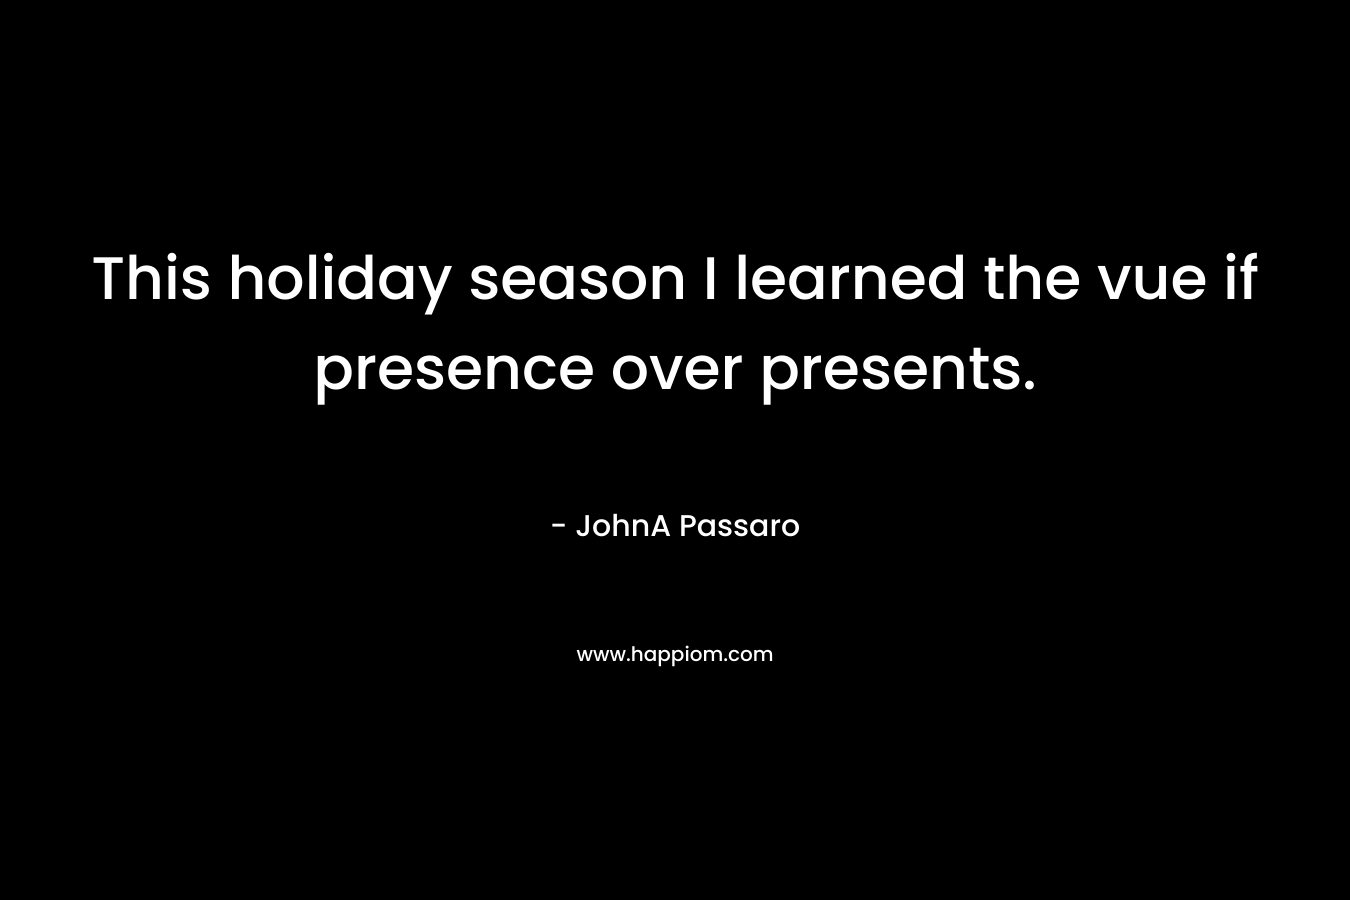 This holiday season I learned the vue if presence over presents. – JohnA Passaro